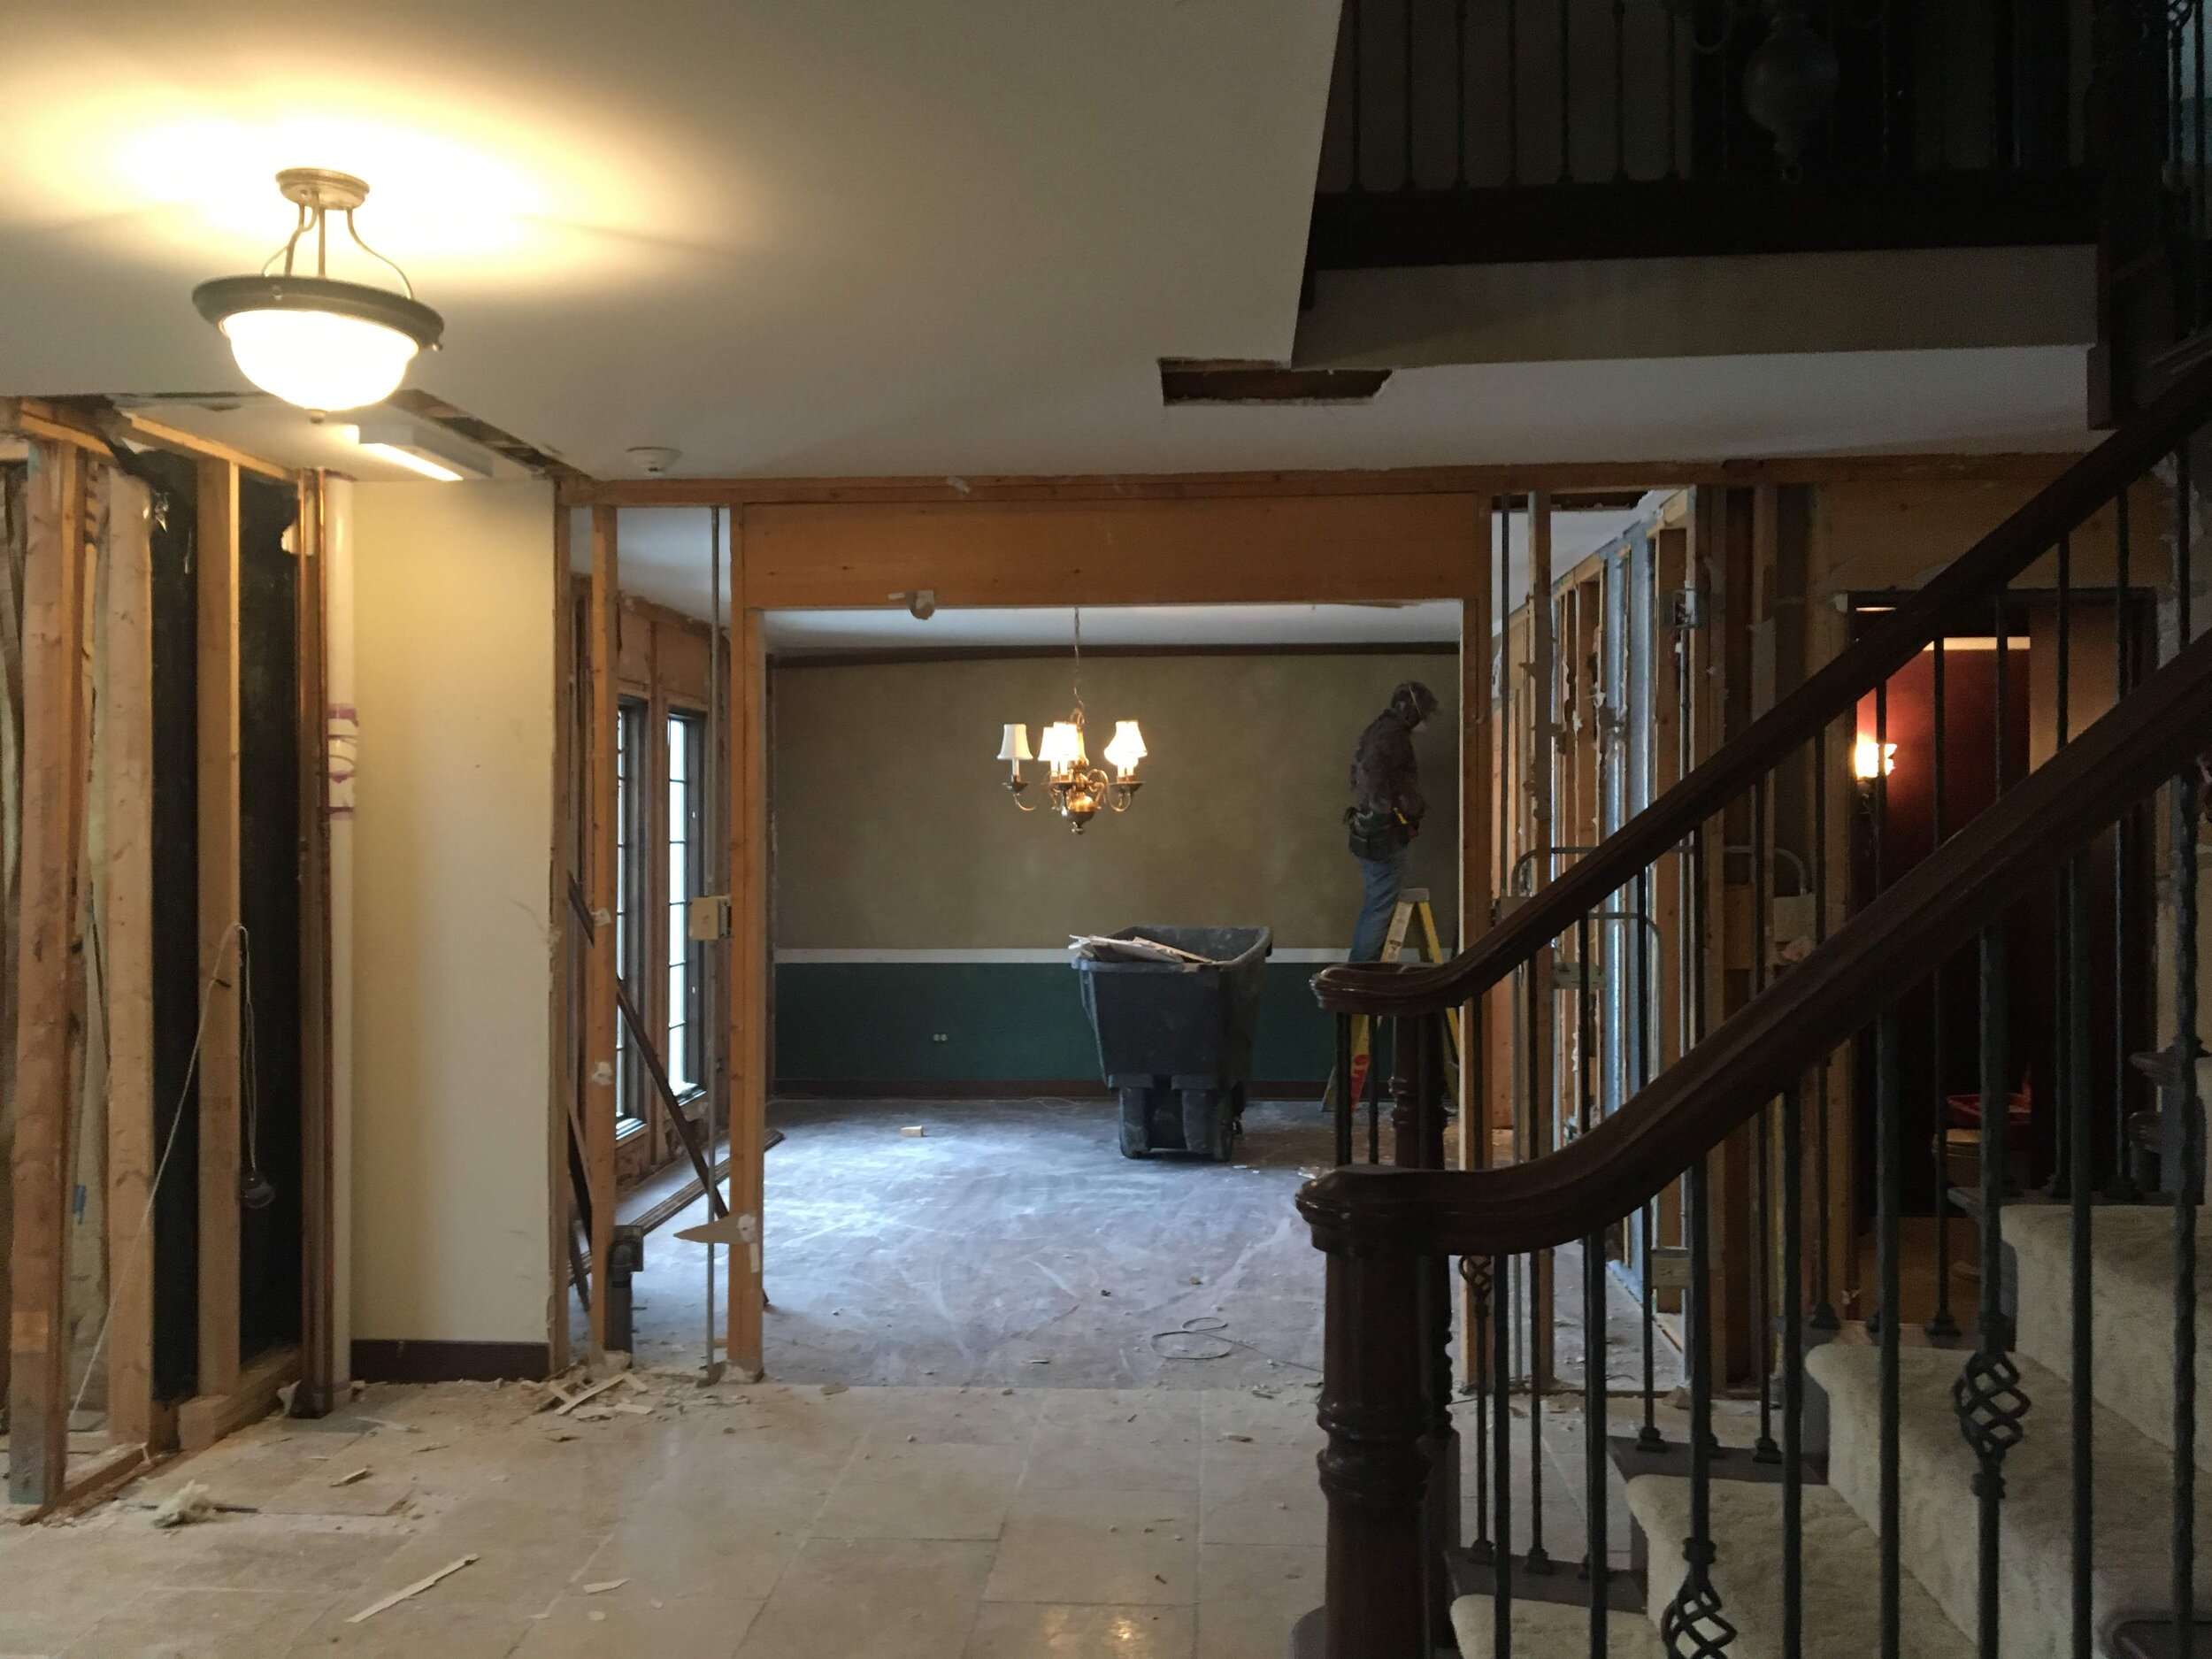 Before: Low ceilings can make any room feel smaller.